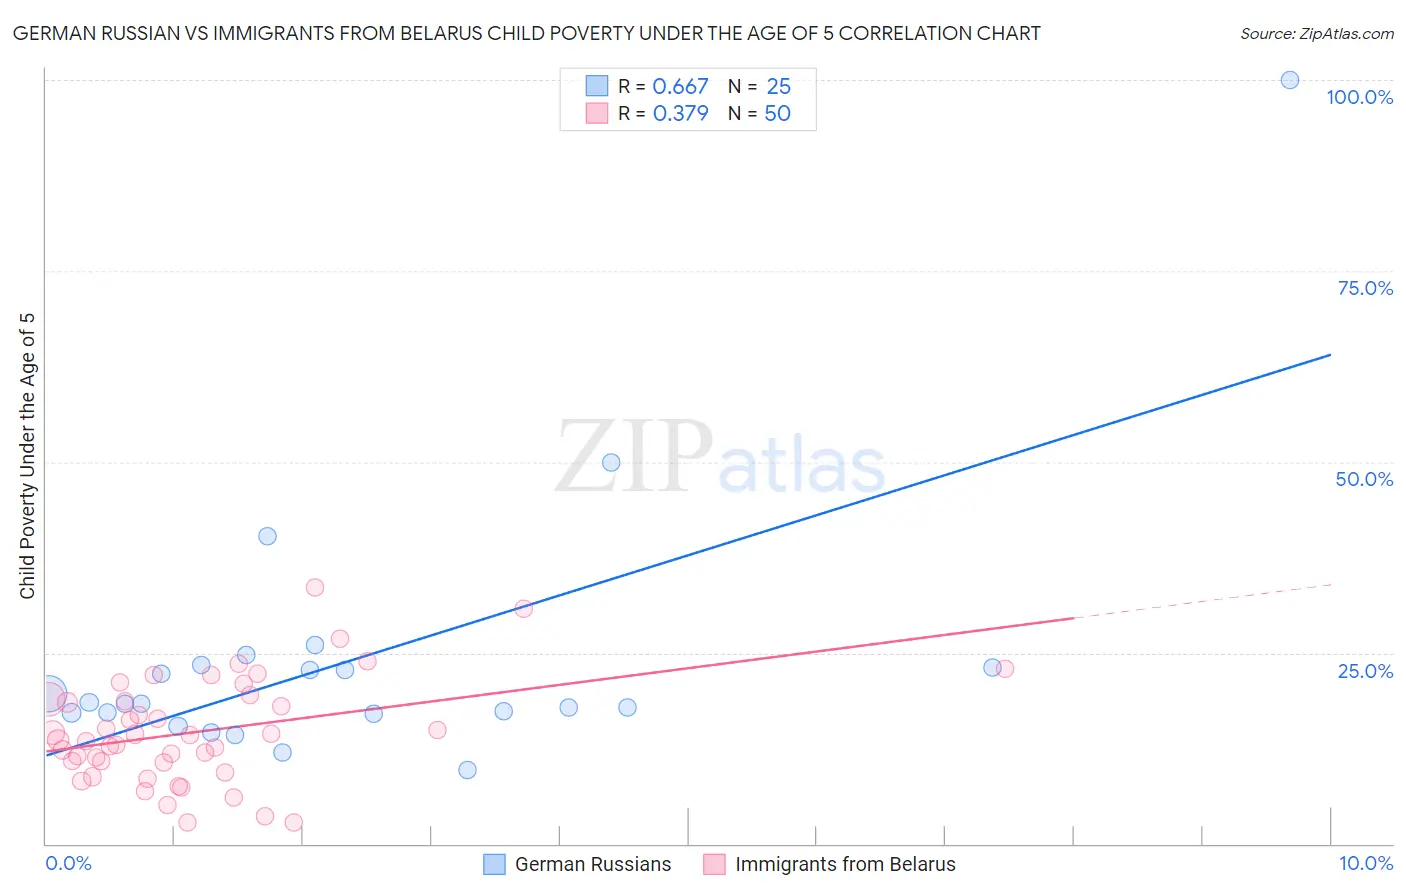 German Russian vs Immigrants from Belarus Child Poverty Under the Age of 5